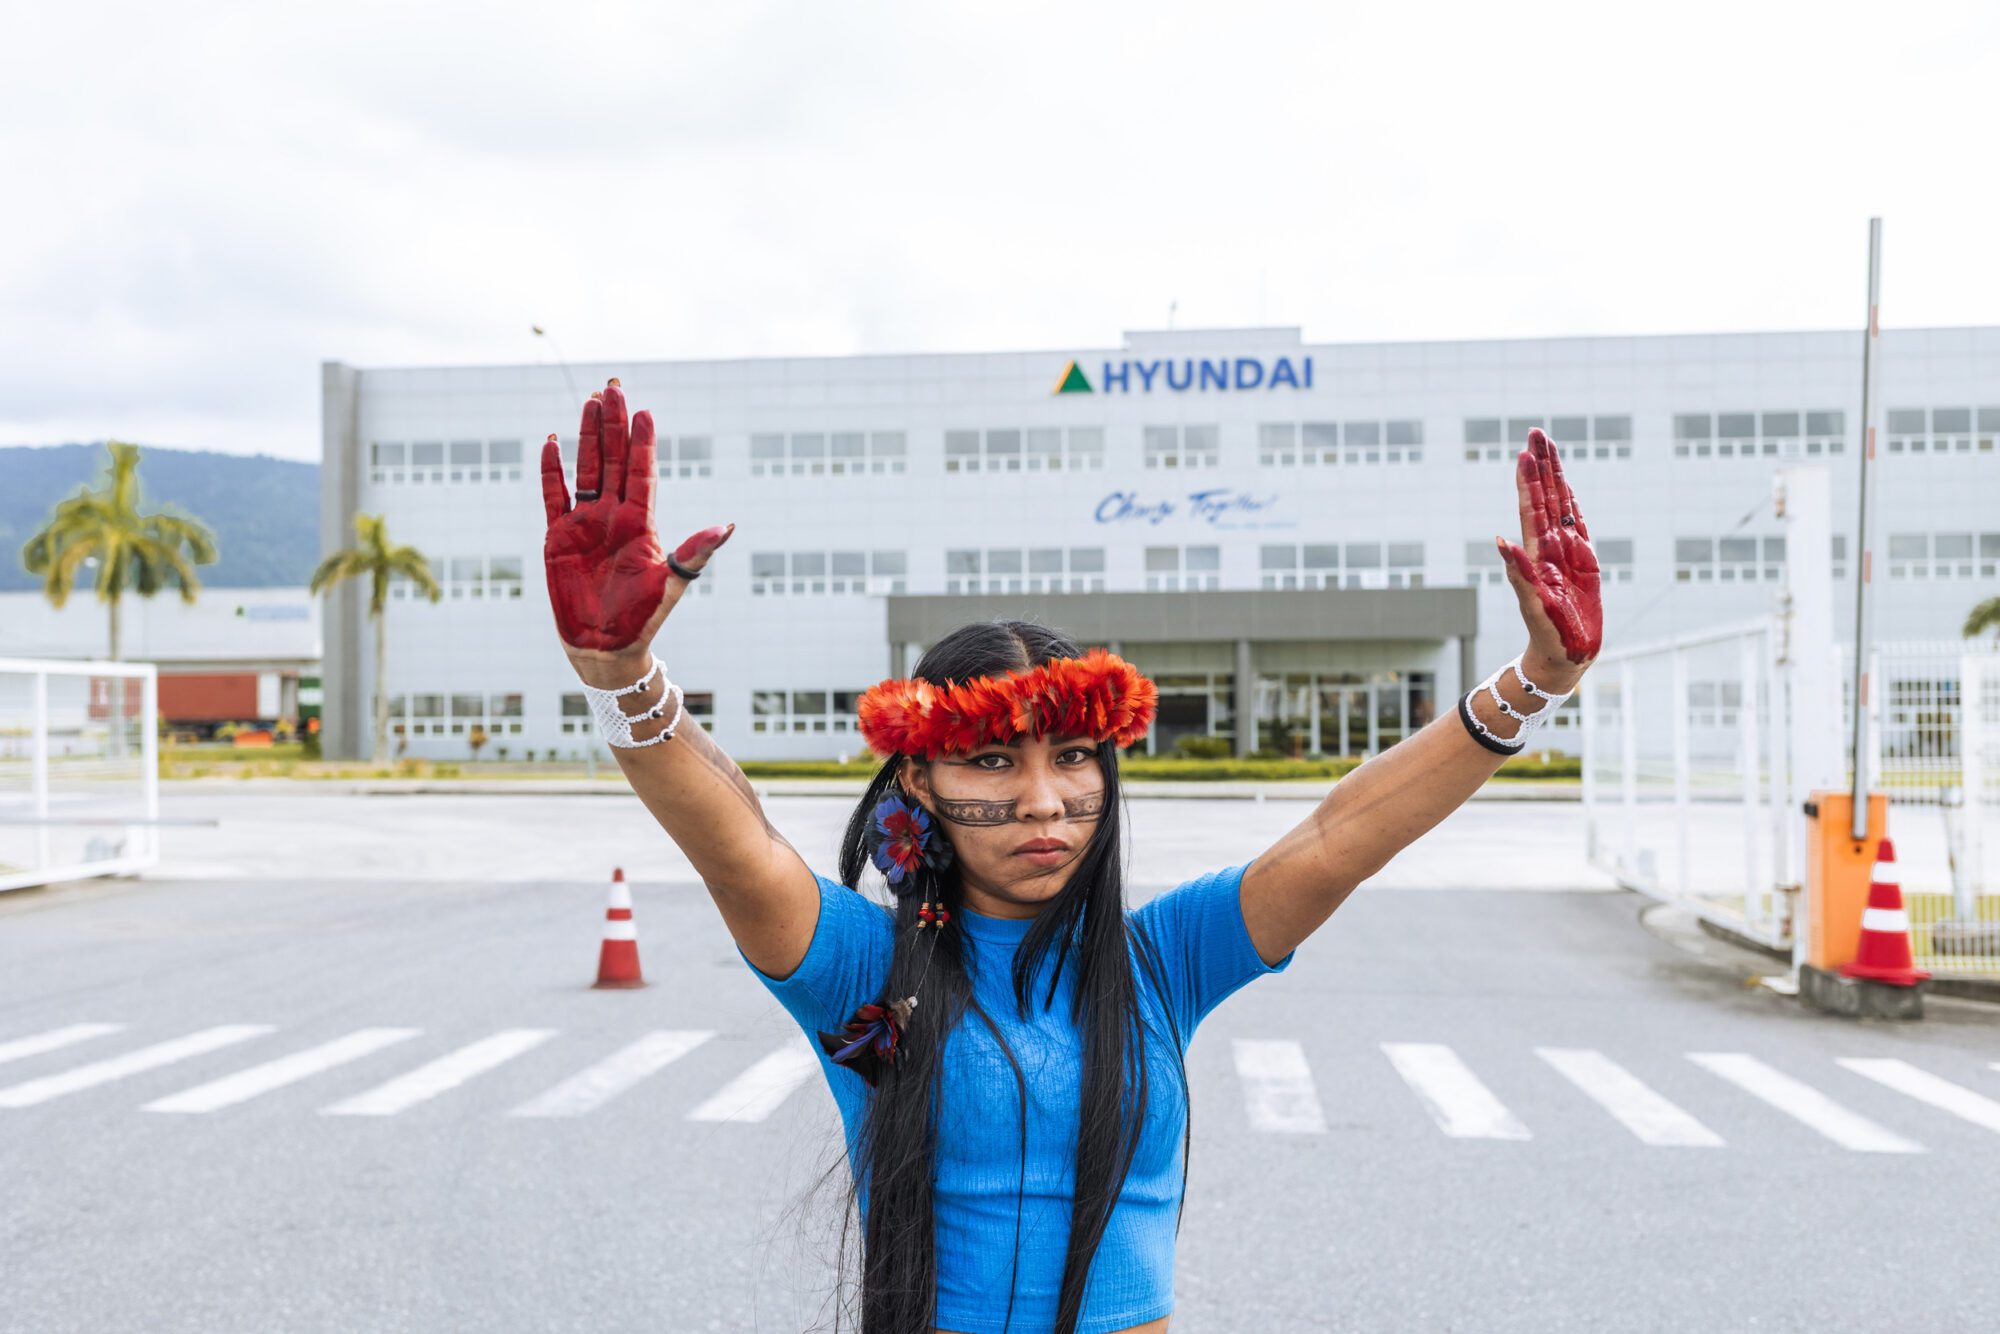 An indigeous activist in traditional headwear holds up red-stained hands to the camera. In the background there's a factory building with the Hyundai logo on the front.